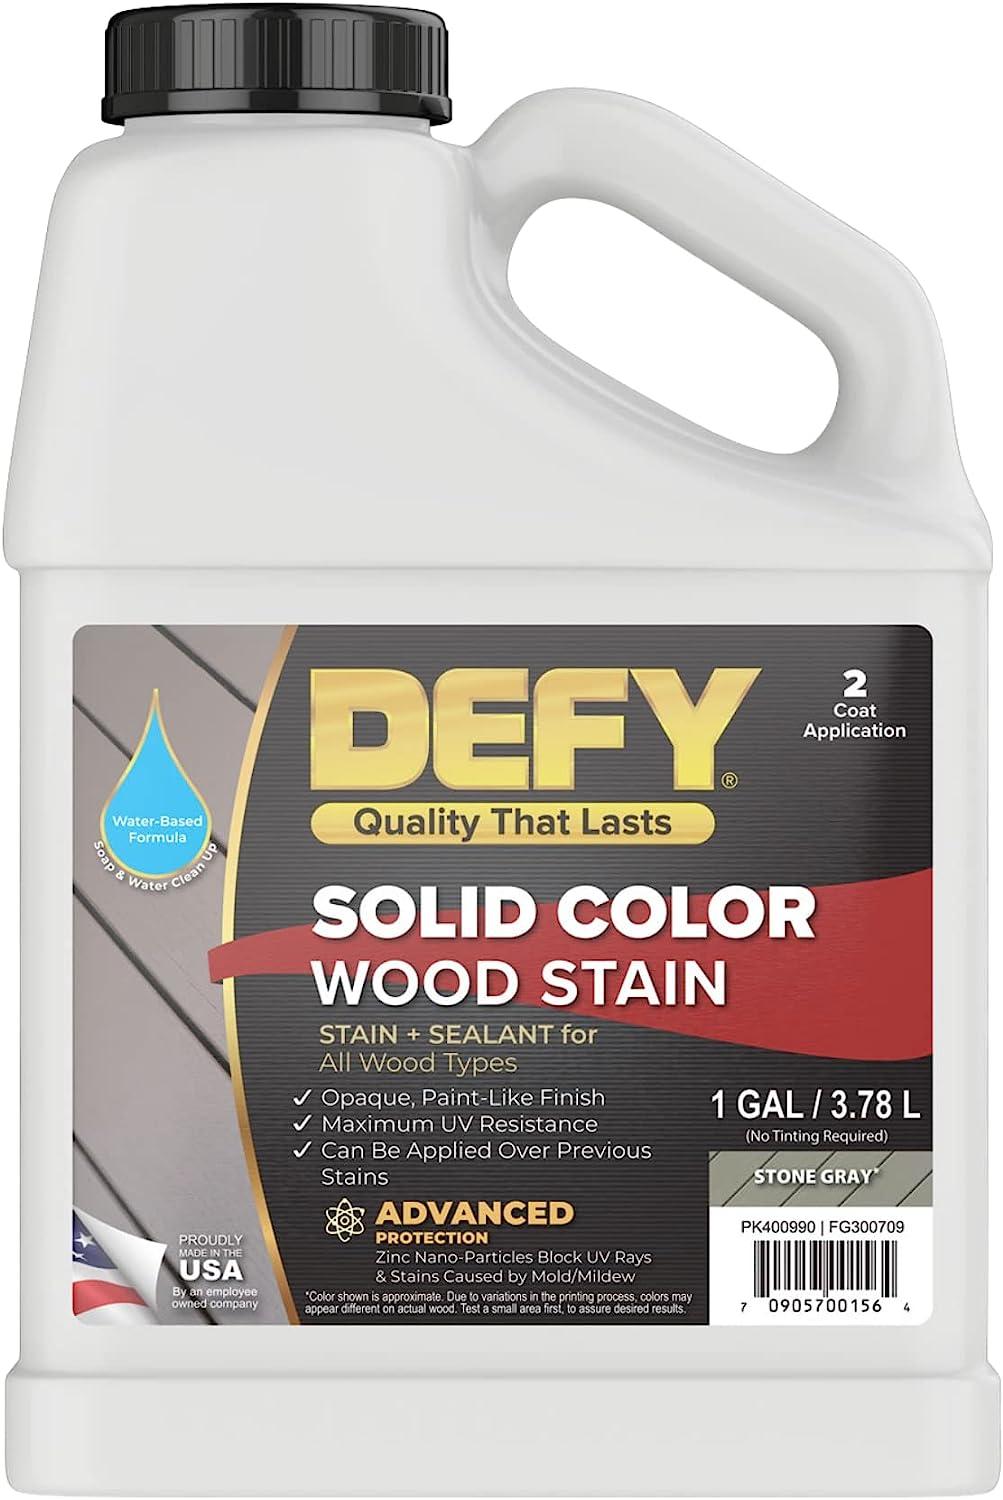 DEFY Solid Color Wood Stain Sealer - Deck Paint and [...]